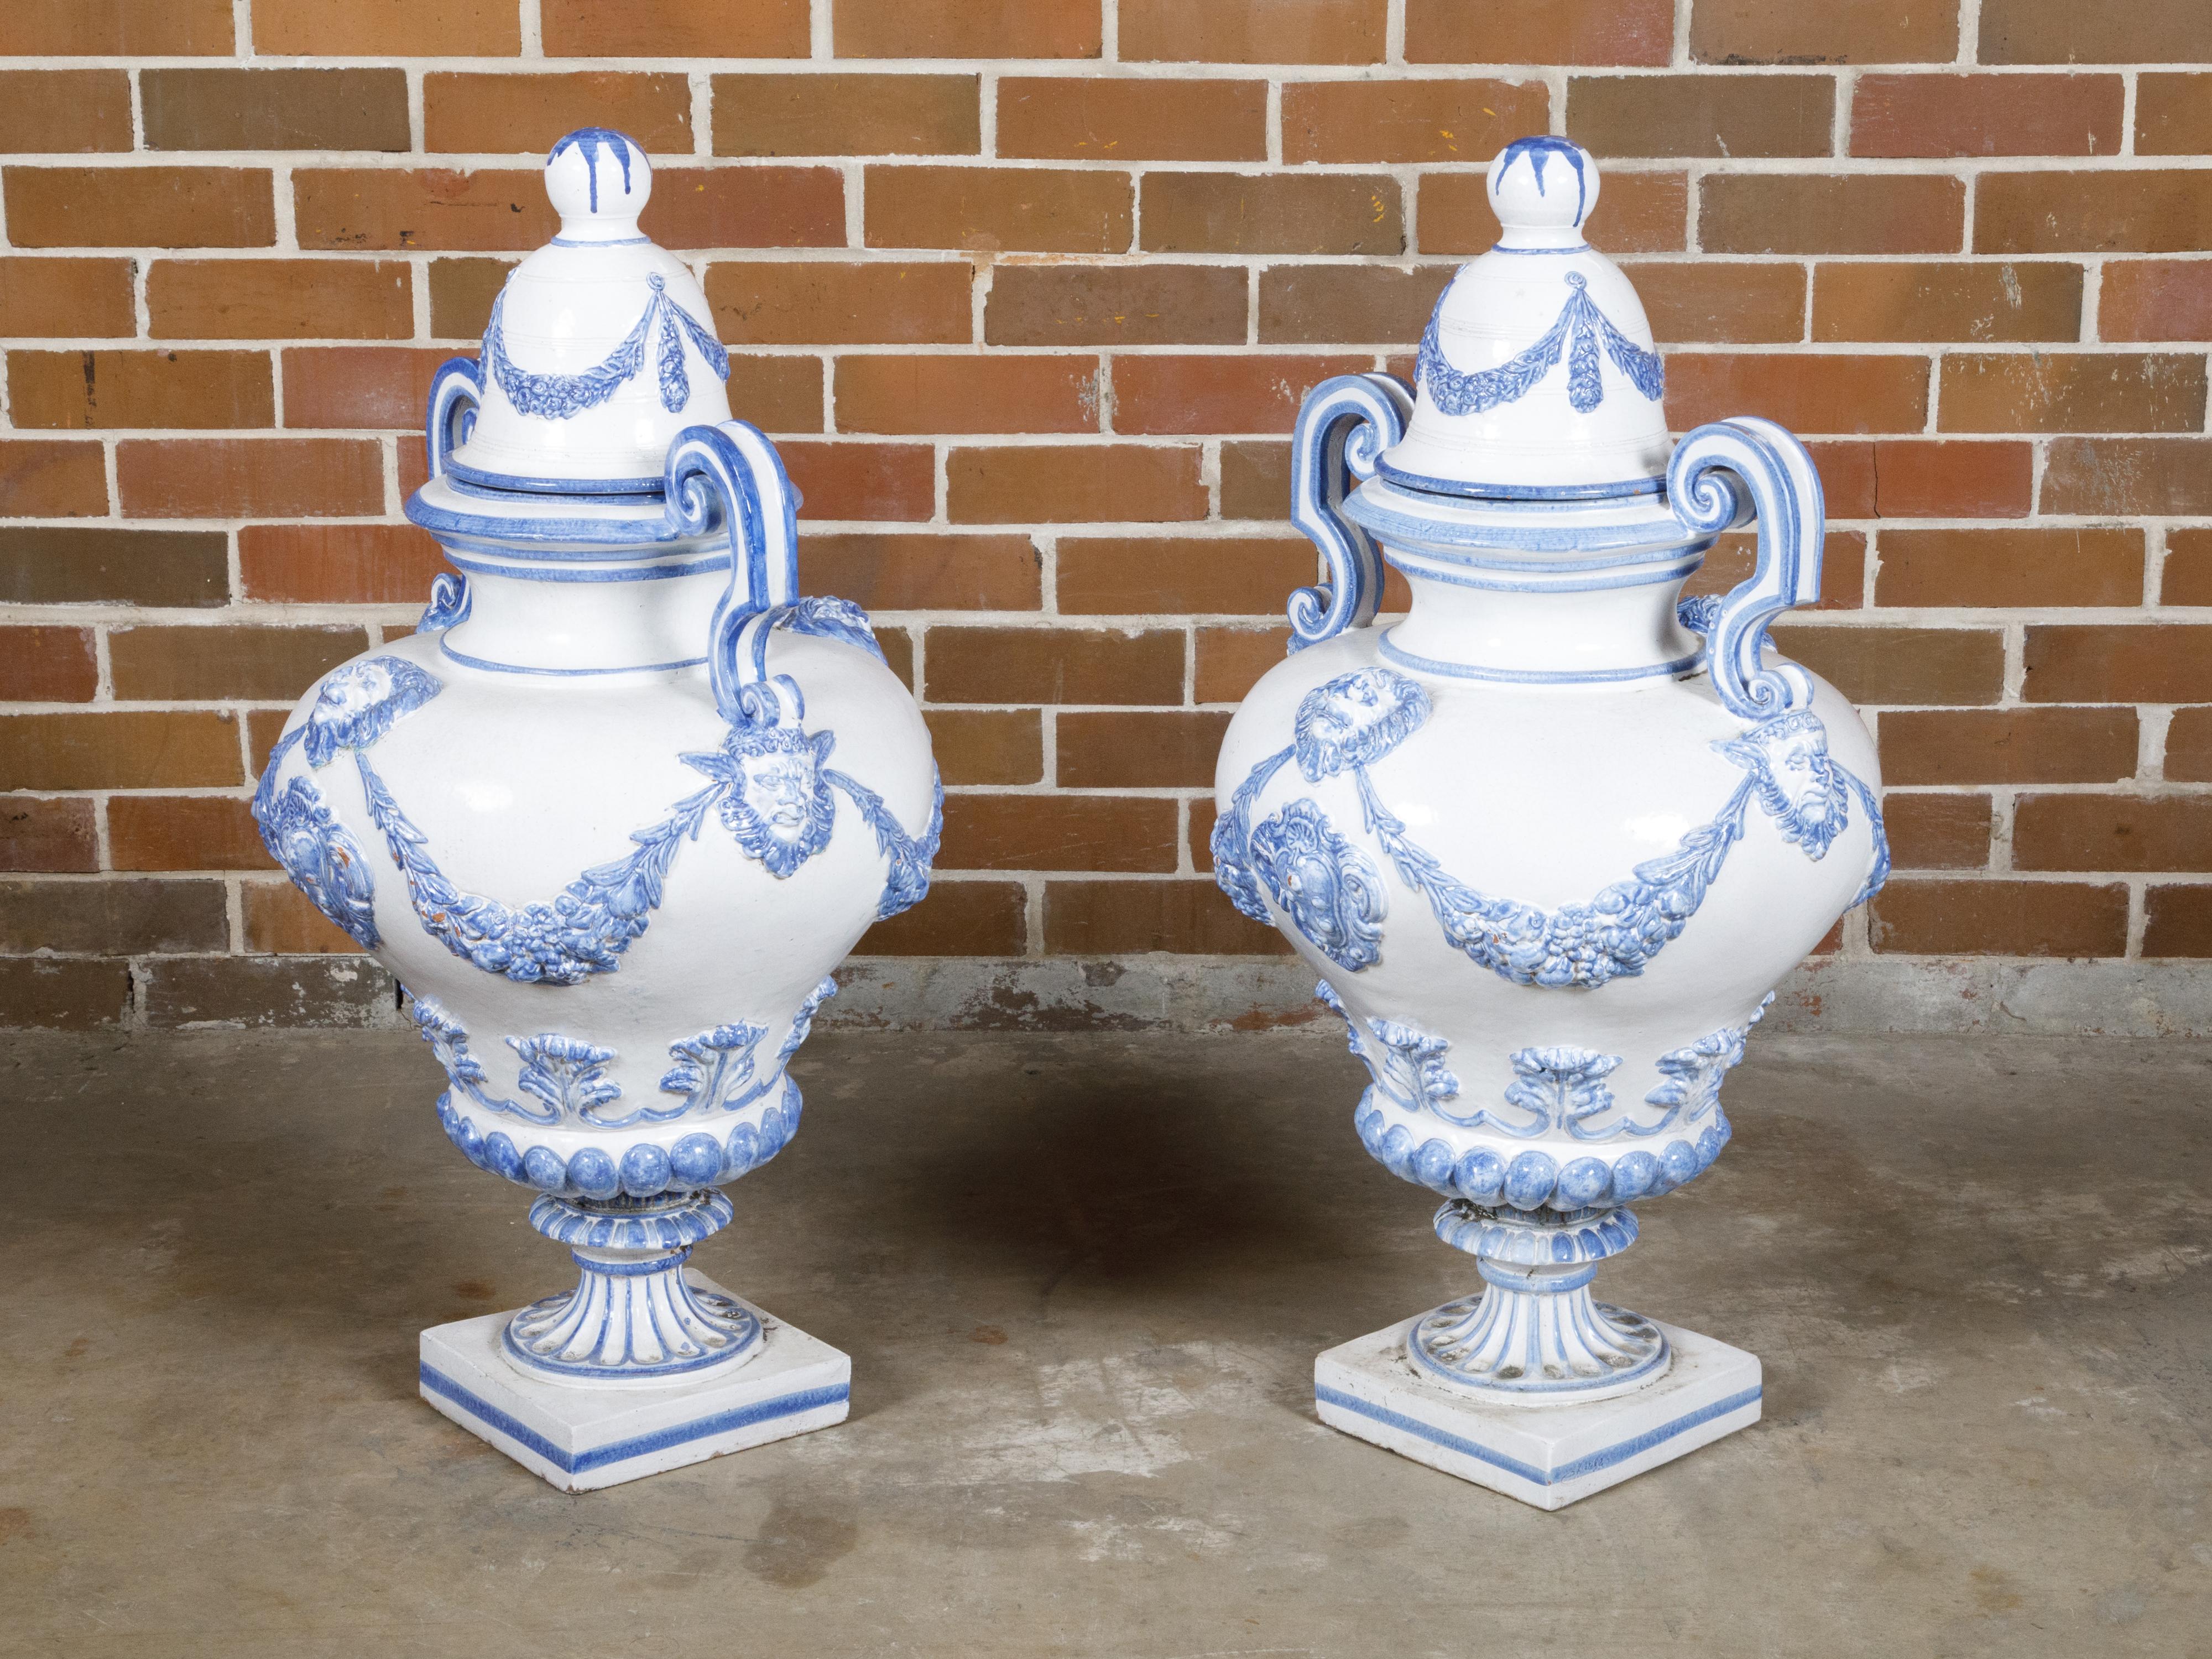 Italian Turn of the Century Blue and White Faience Lidded Jars with Fauns, Pair For Sale 7